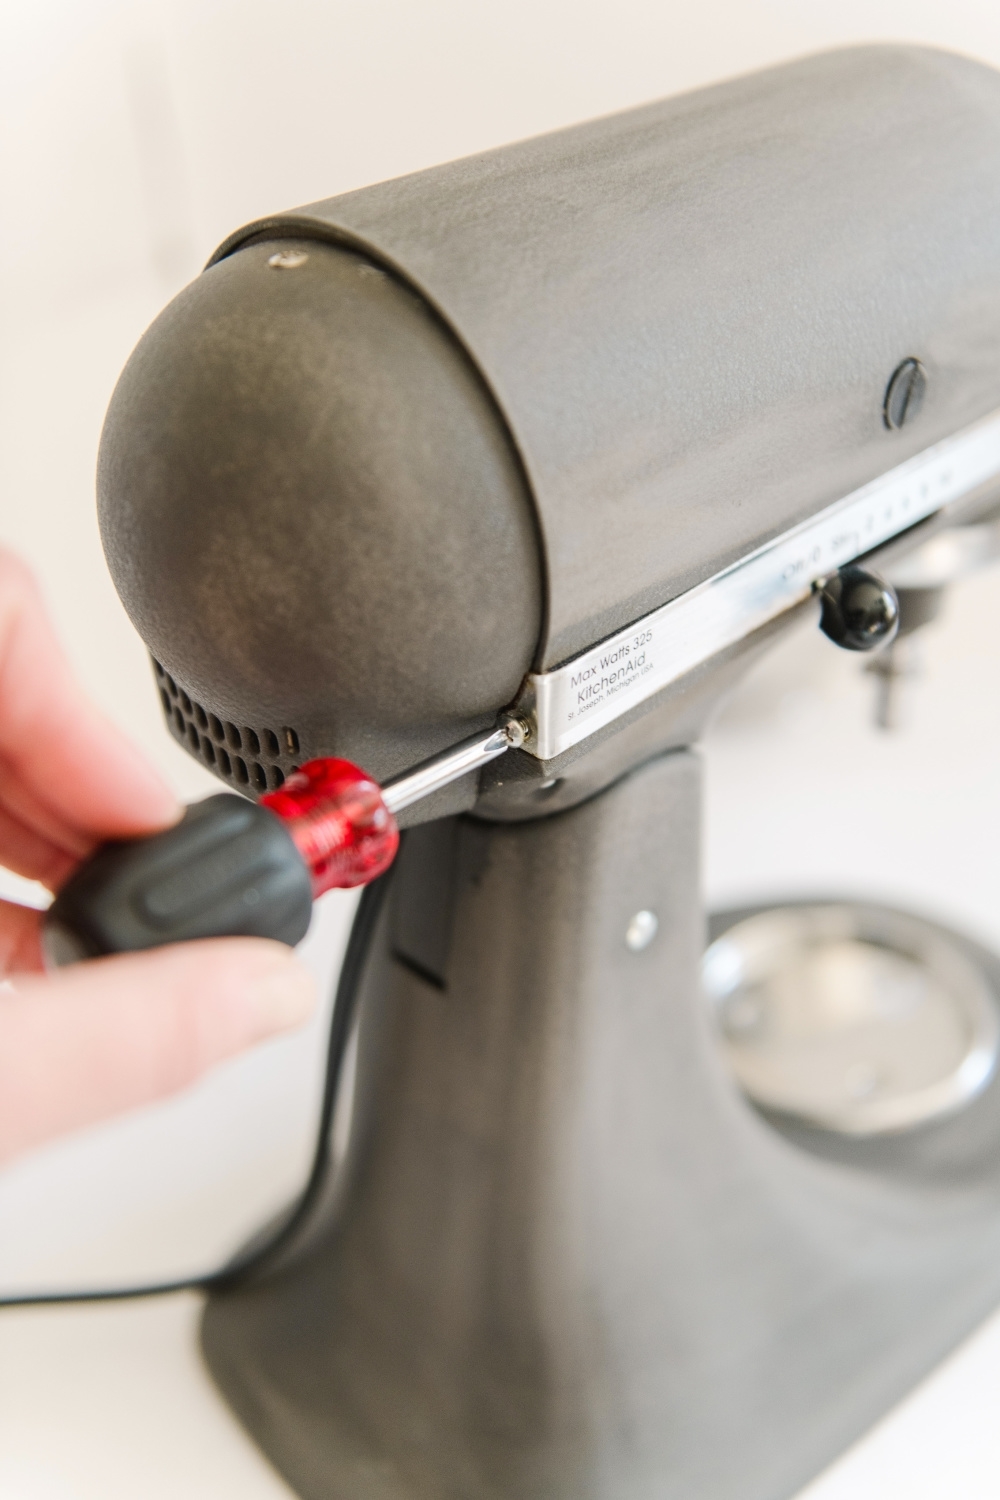 Take off removable parts and clean your stand mixer